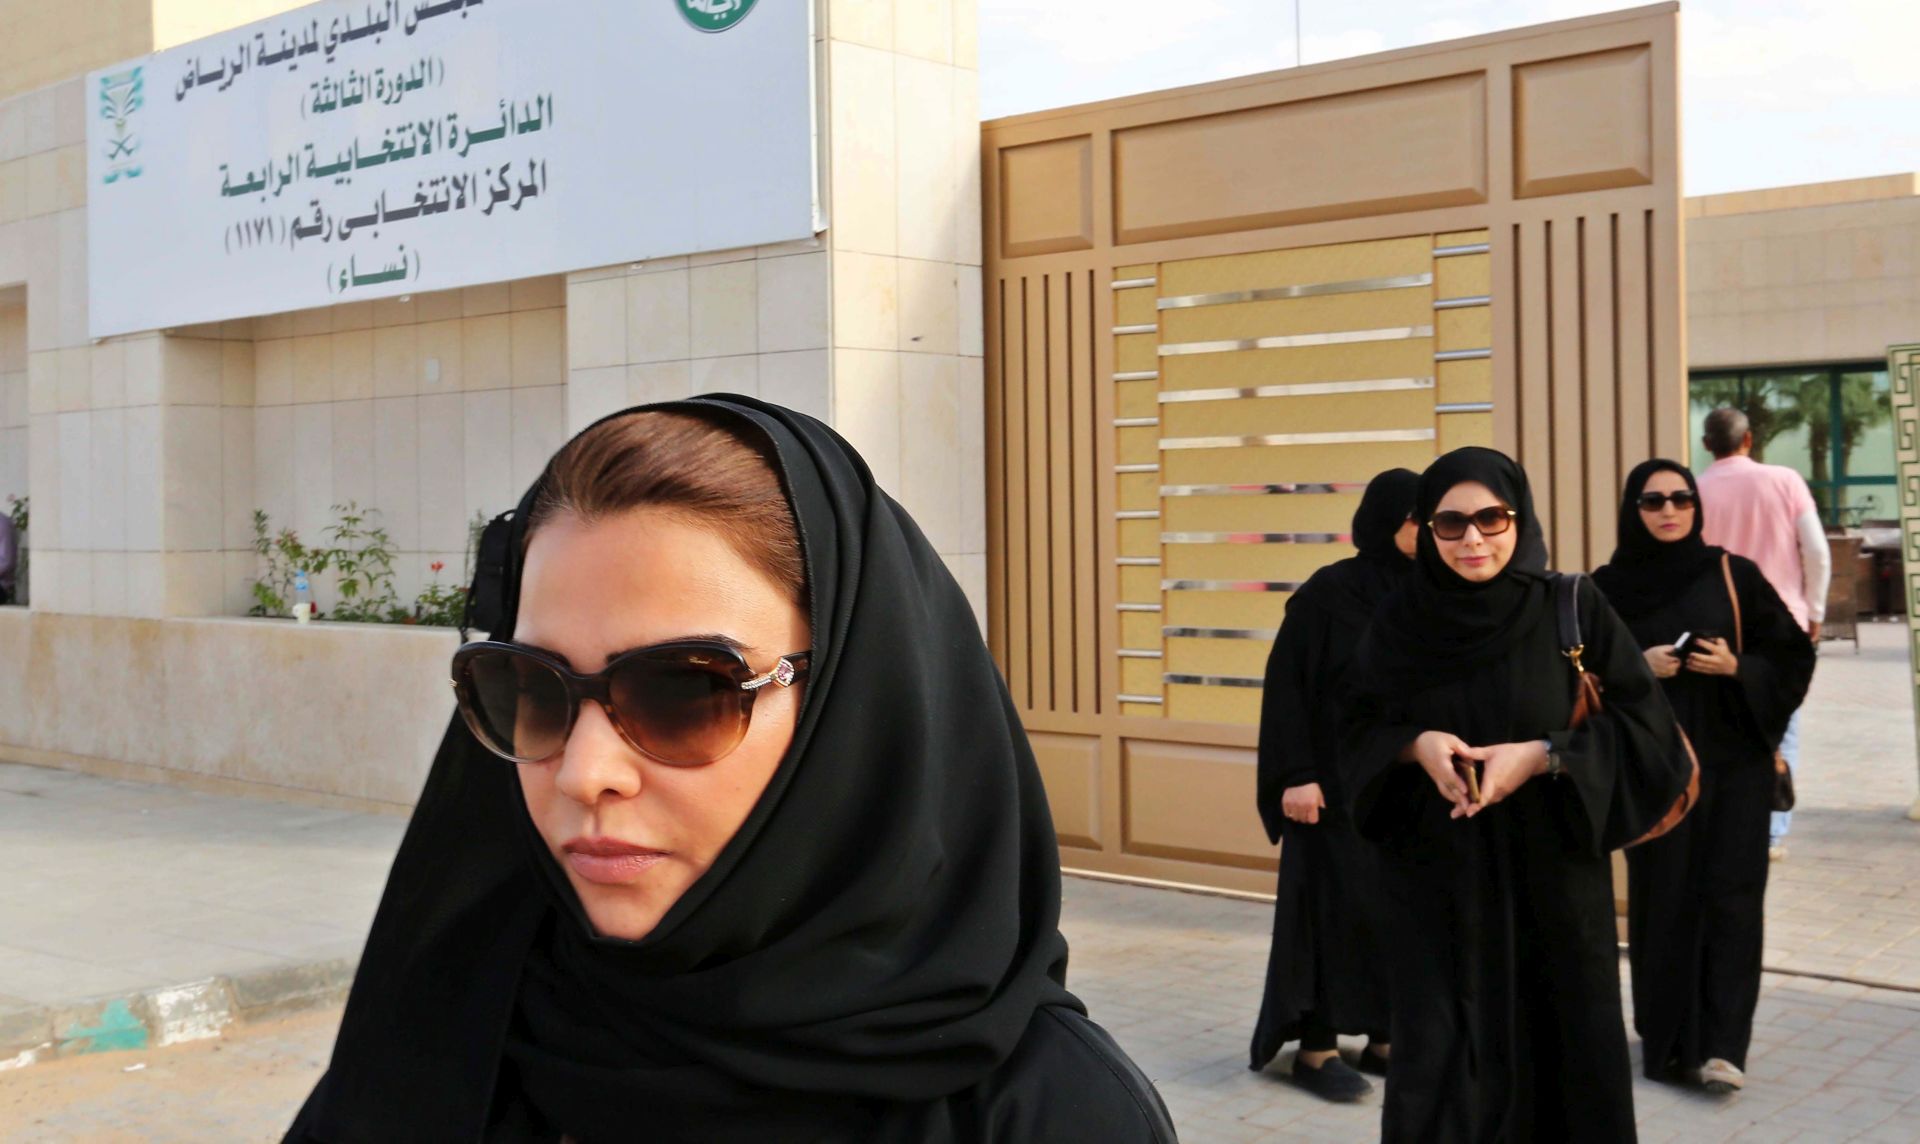 epa05066147 Saudi women leave a polling station after casting their votes in the Kigdom's municipal elections, in Riyadh, Saudi Arabia, 12 December 2015. For the first time Saudi women have been allowed to run and vote in the the country's municipal elections, regarded as a small but significant opening of the ultra conservative society to women. Though female candidates were not allowed to campaign and had to be accomapanied by a male guardian in order to be able to vote in the country where they are still not allowed by law to drive. The voting age was also lowered prior to the election from 21 to 18.  EPA/AHMED YOSRI